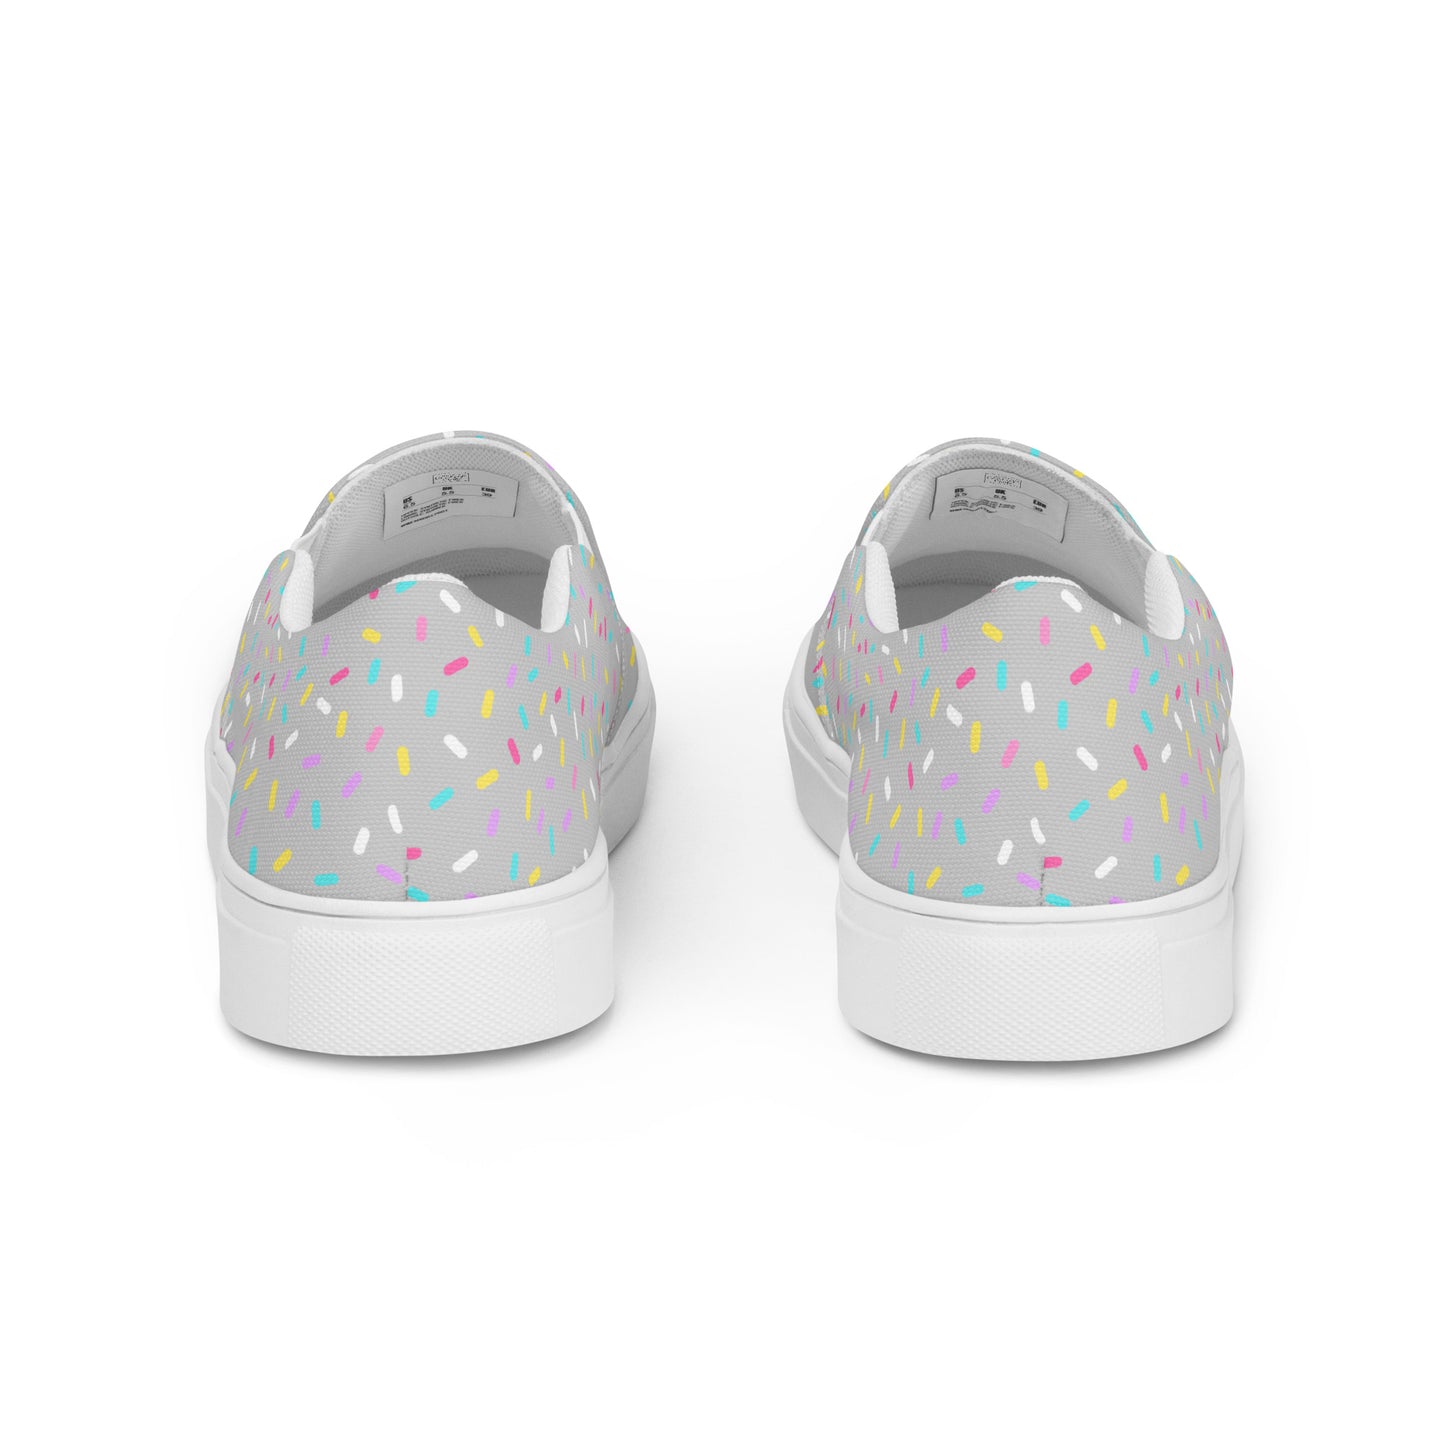 Sprinkled with Love - Women’s Slip-on Canvas Shoes in Gray